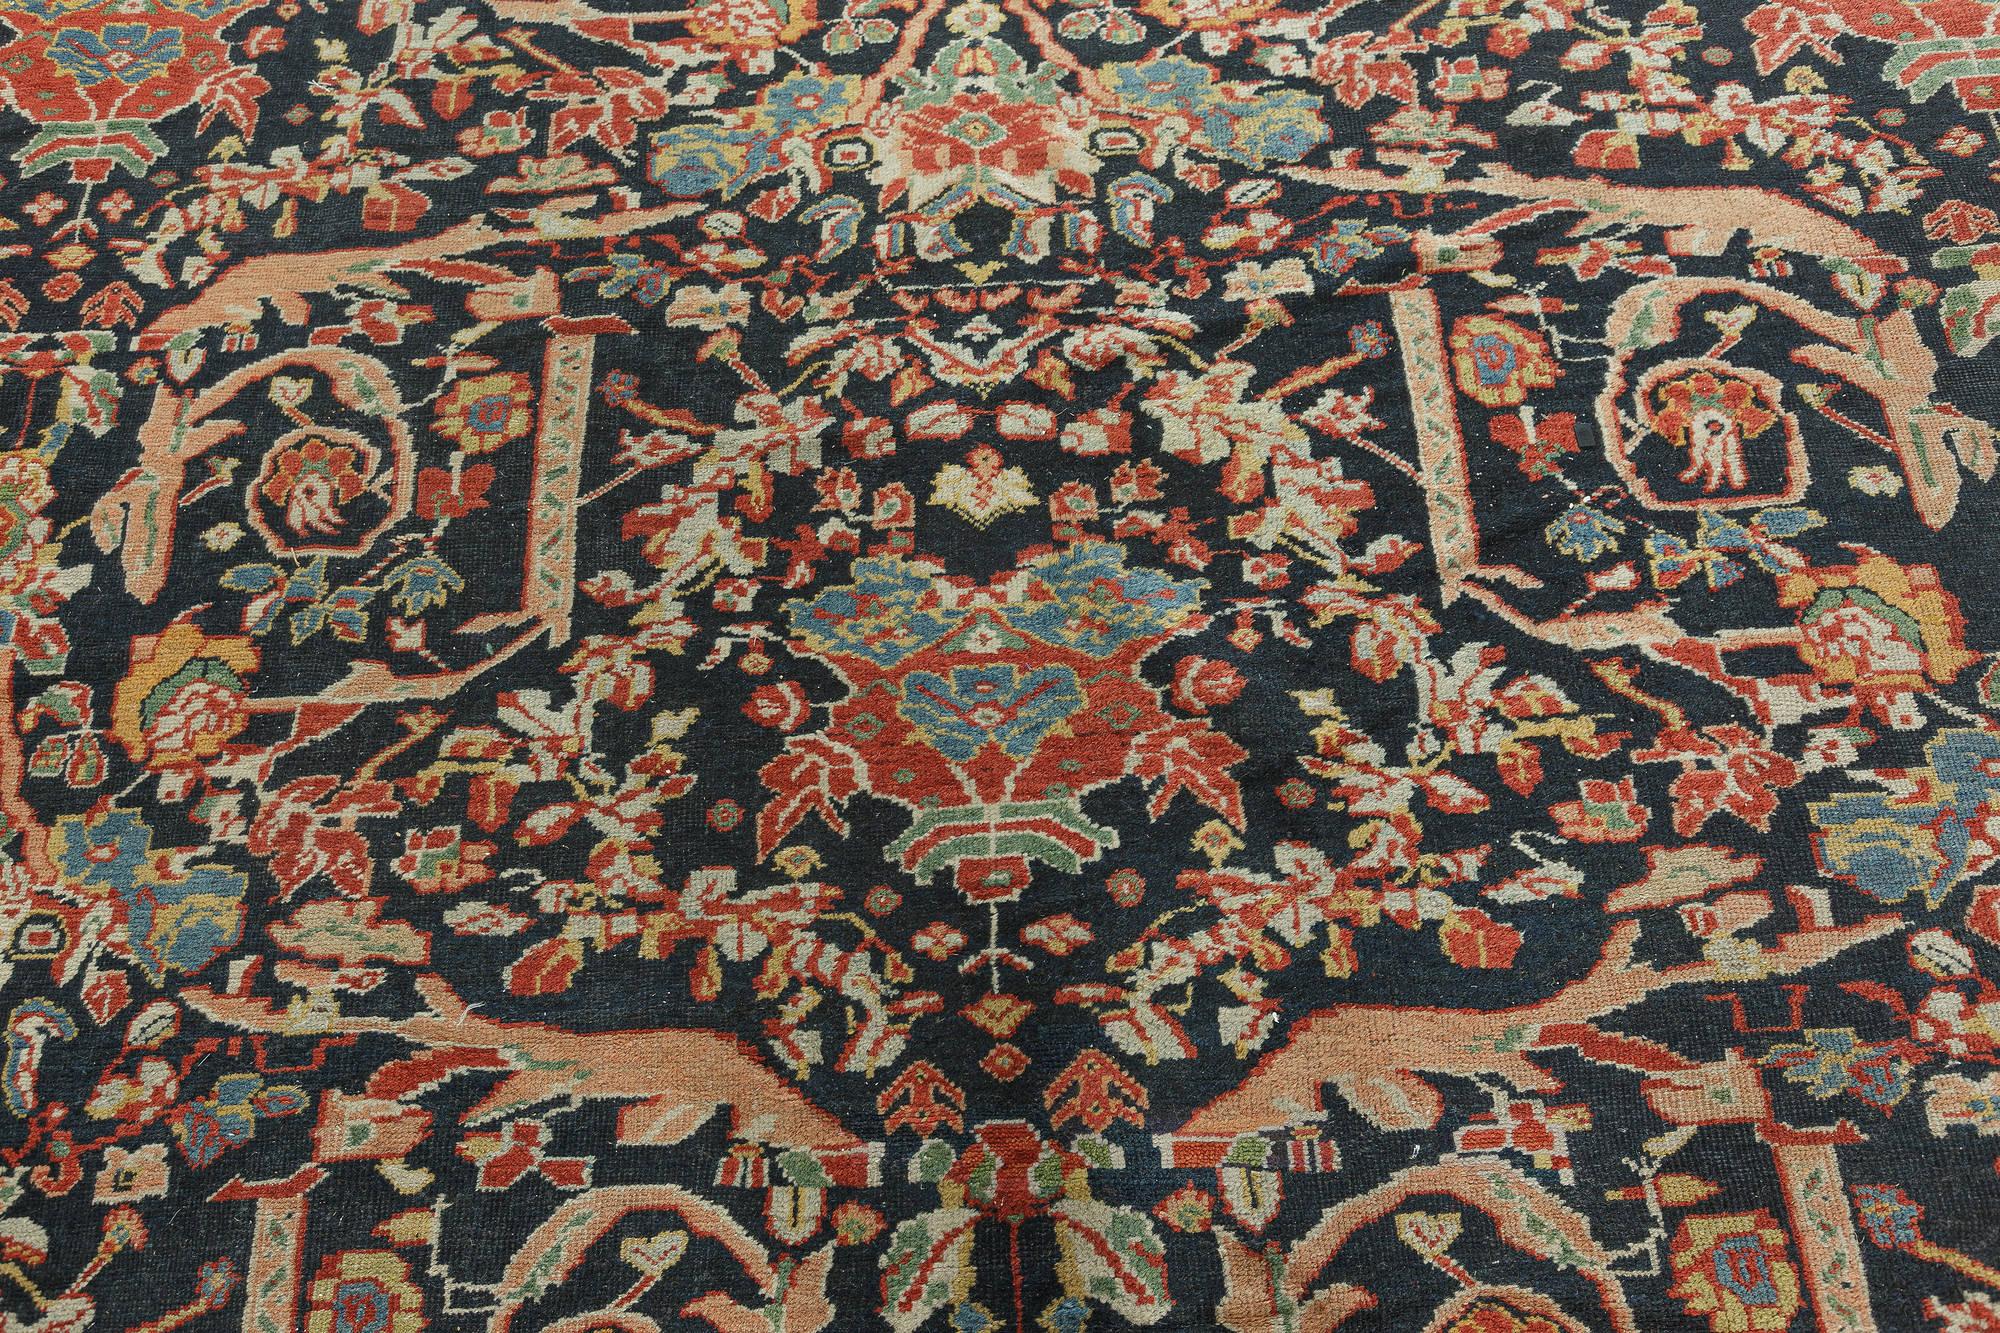 Antique Persian Sultanabad Handmade Wool Rug
Size: 12'5